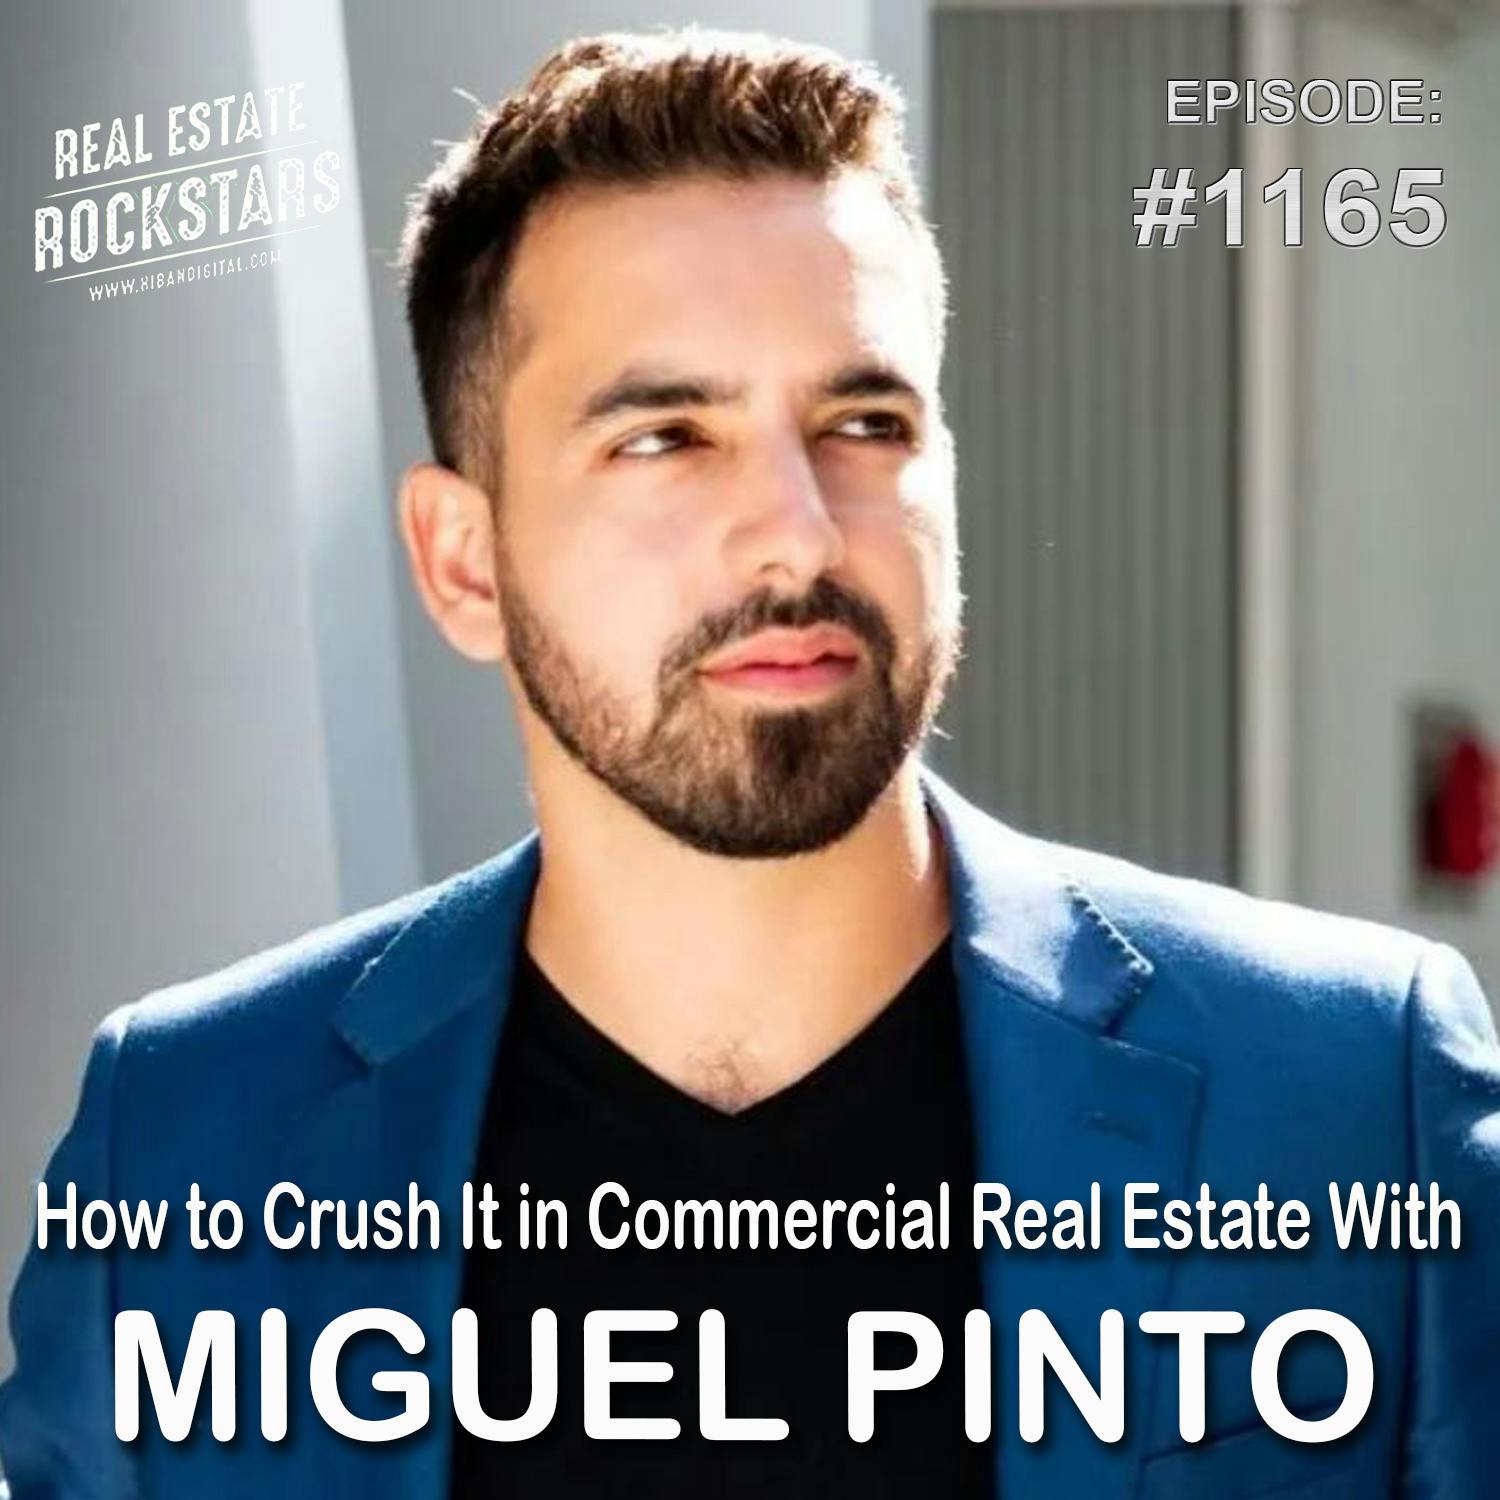 1165: How to Crush It in Commercial Real Estate With Miguel Pinto